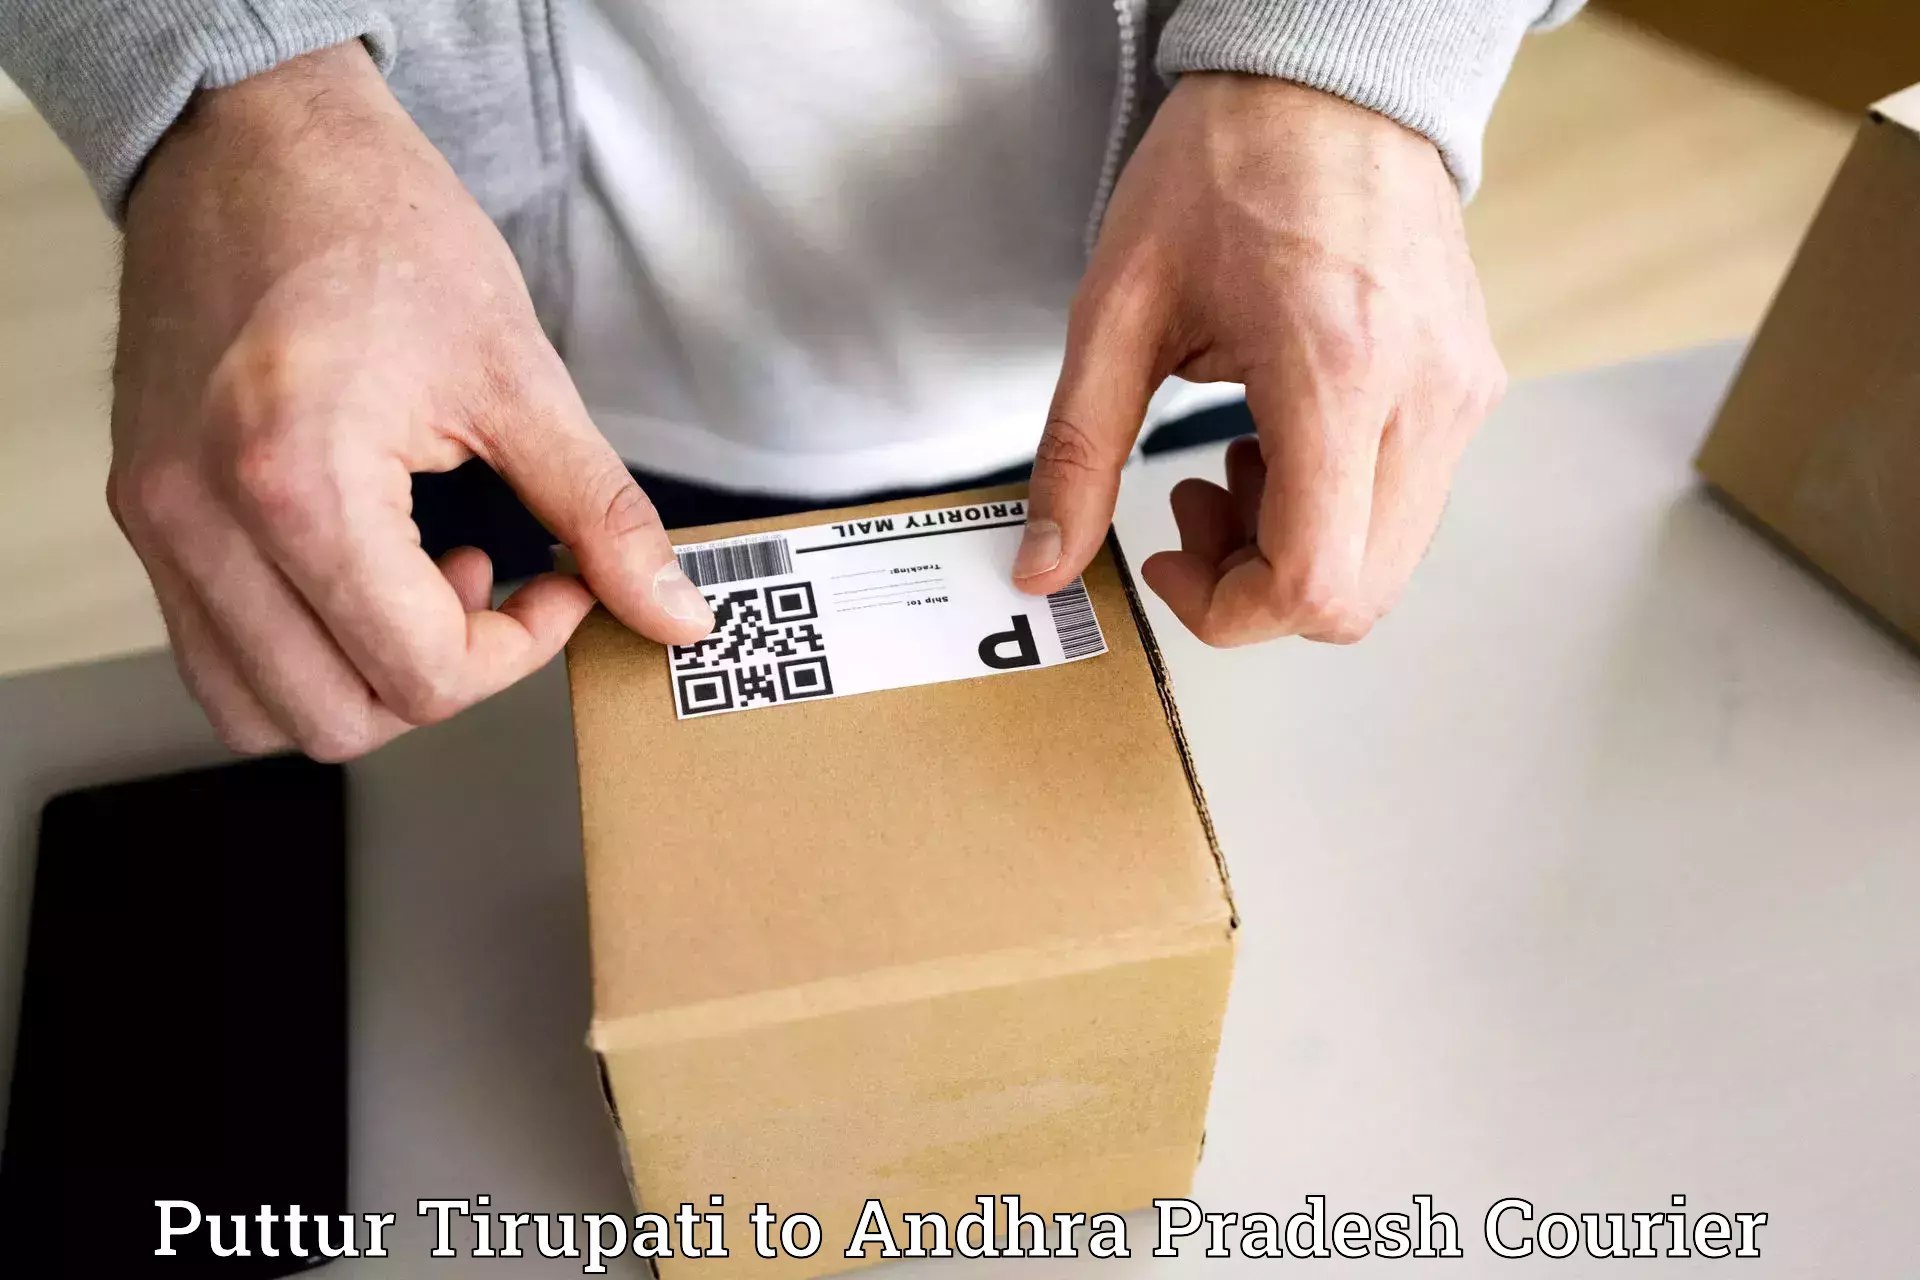 Same-day delivery solutions Puttur Tirupati to Chittoor